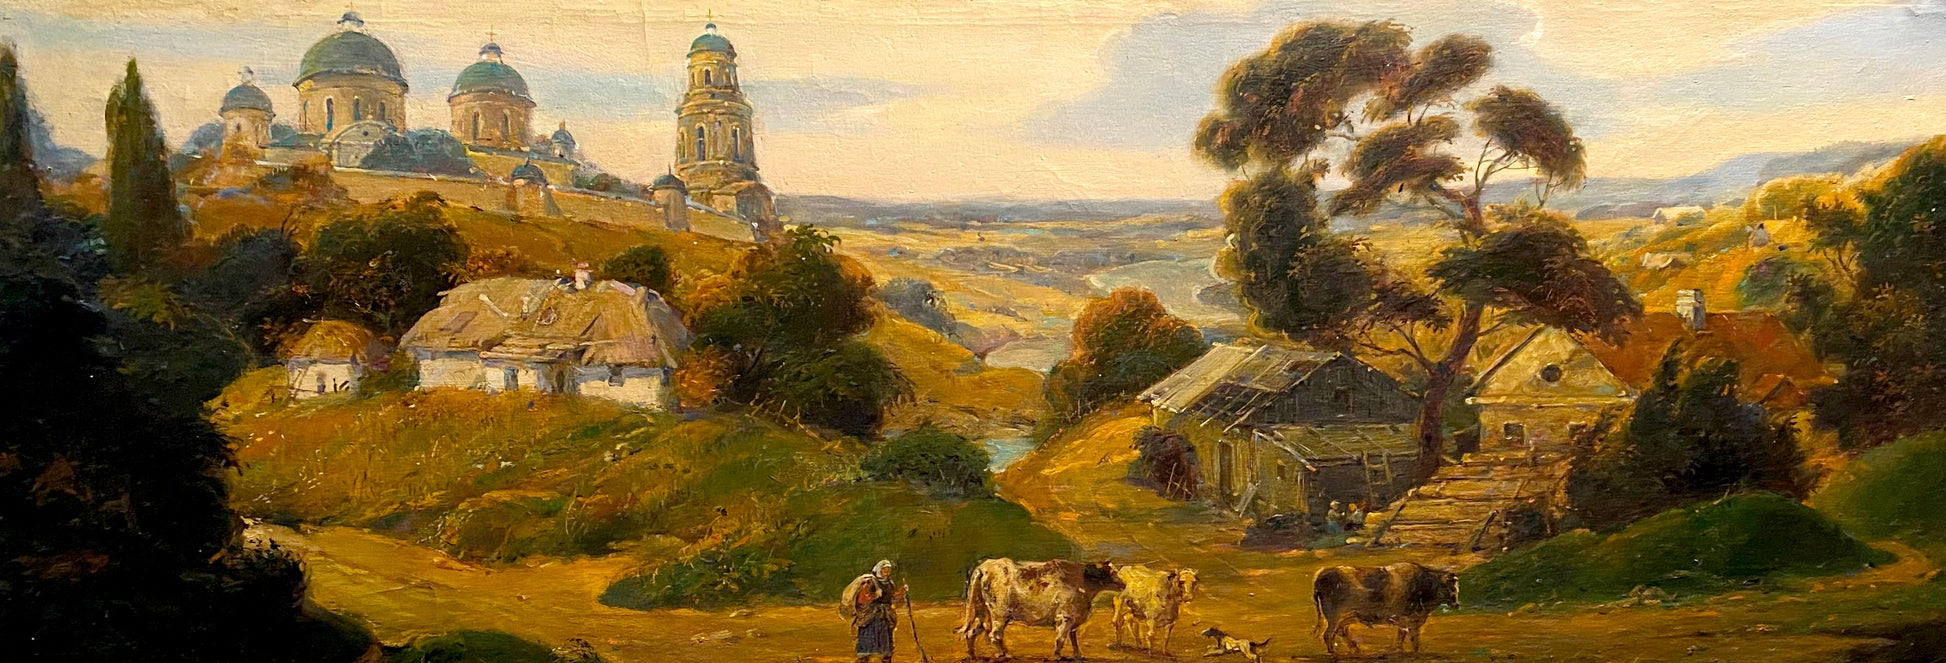 Oil painting In the homeland of Gogol buy